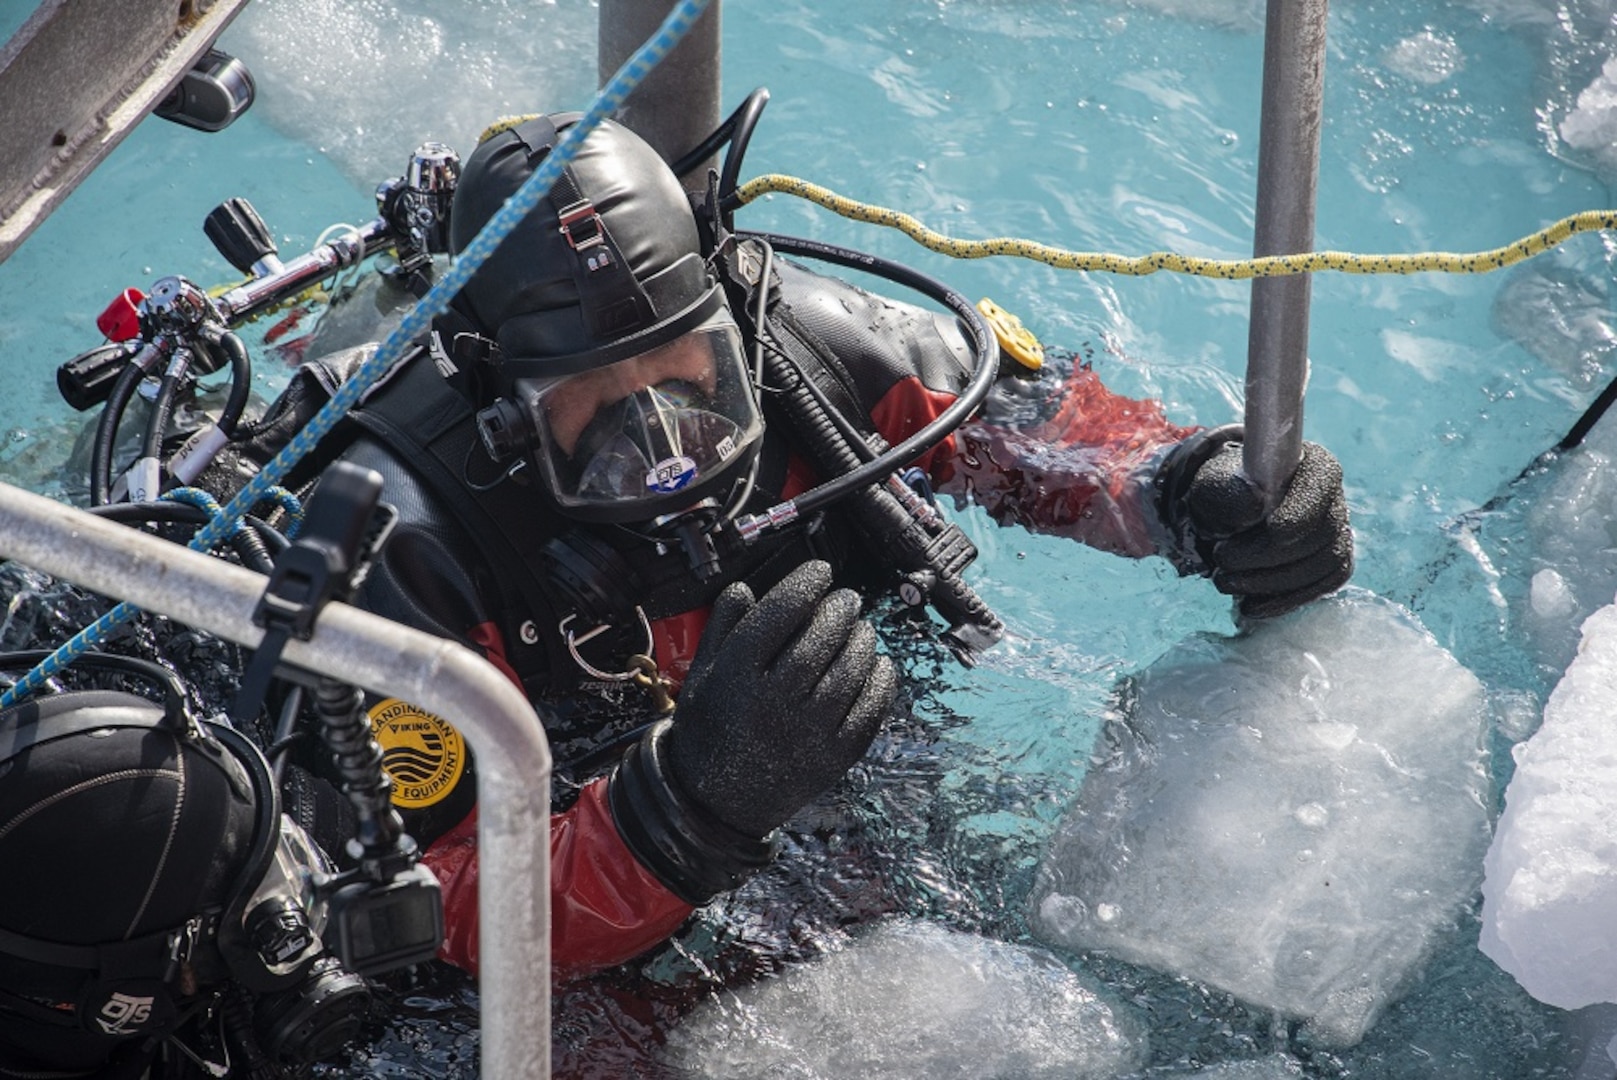 U.S. Coast Guard Petty Officer 1st Class Andres Murtillo enters the water Feb. 1, 2020, during a scuba dive about seven miles north of McMurdo Station, Antarctica. Scuba divers from the U.S. Coast Guard, U.S. Army and the Royal Canadian Navy are serving aboard the U.S. Coast Guard Cutter Polar Star (WAGB-10) in order to effect emergency repairs if needed to the 44-year-old heavy icebreaker. The crew of the Seattle-based Polar Star is working near Antarctica in support of Operation Deep Freeze 2020, the U.S. military’s contribution to the National Science Foundation-managed U.S. Antarctic Program. U.S. Coast Guard photograph by Senior Chief Petty Officer NyxoLyno Cangemi